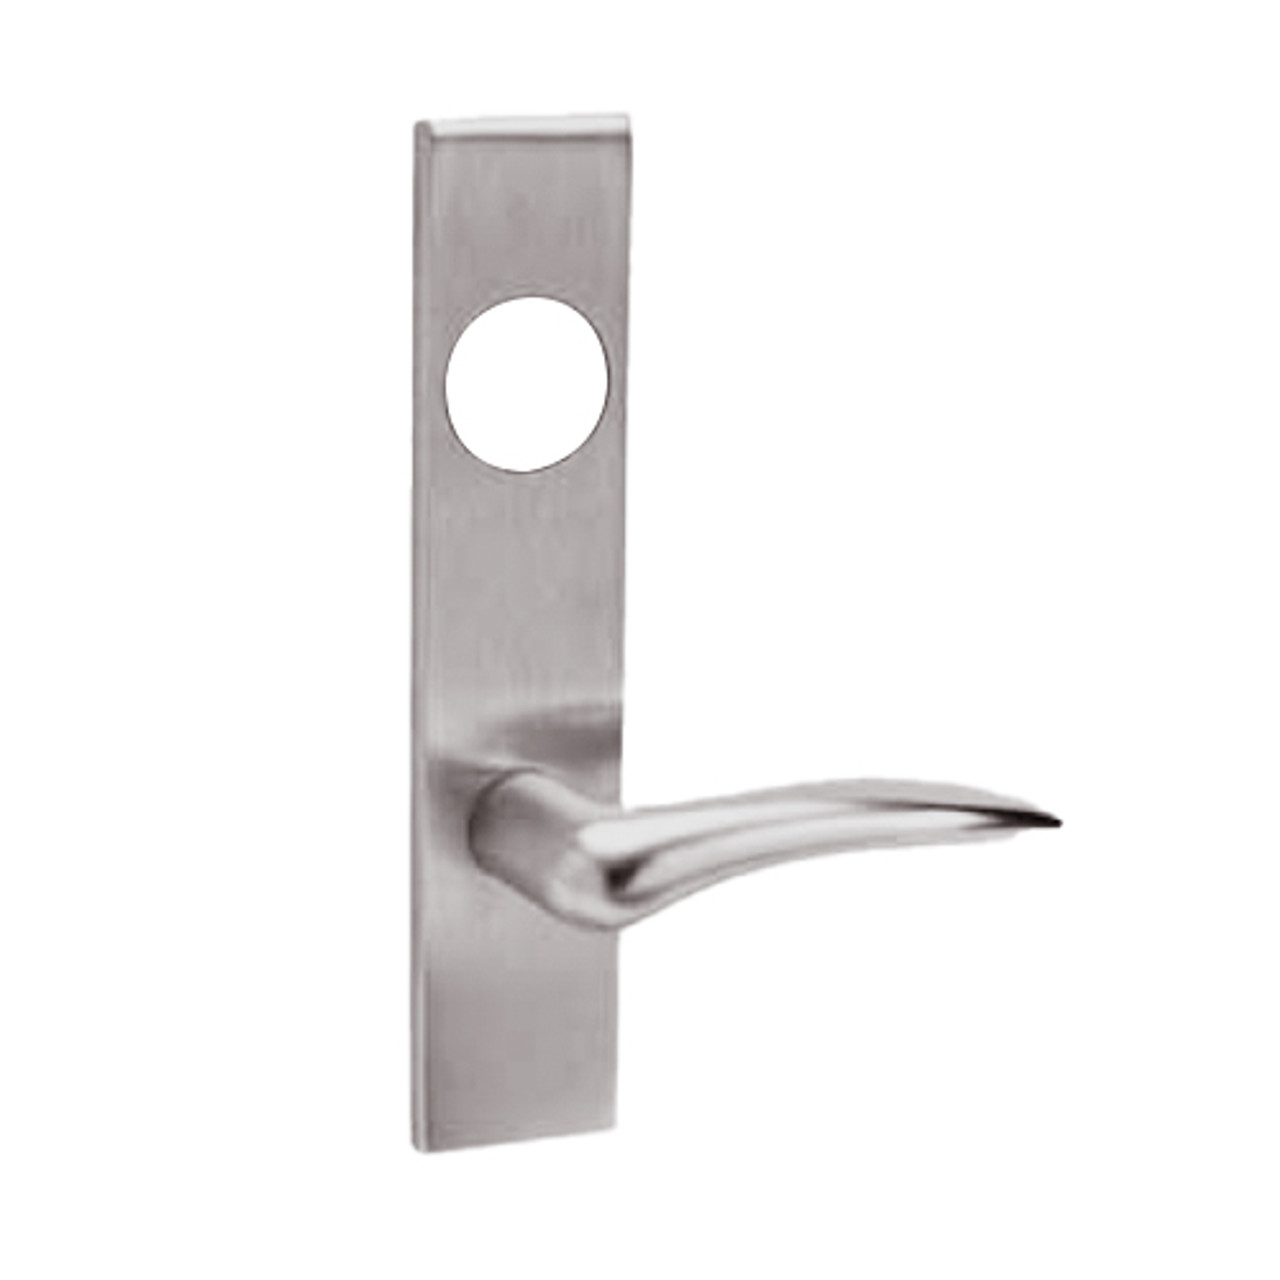 ML2054-DSR-630-CL7-LH Corbin Russwin ML2000 Series IC 7-Pin Less Core Mortise Entrance Locksets with Dirke Lever in Satin Stainless